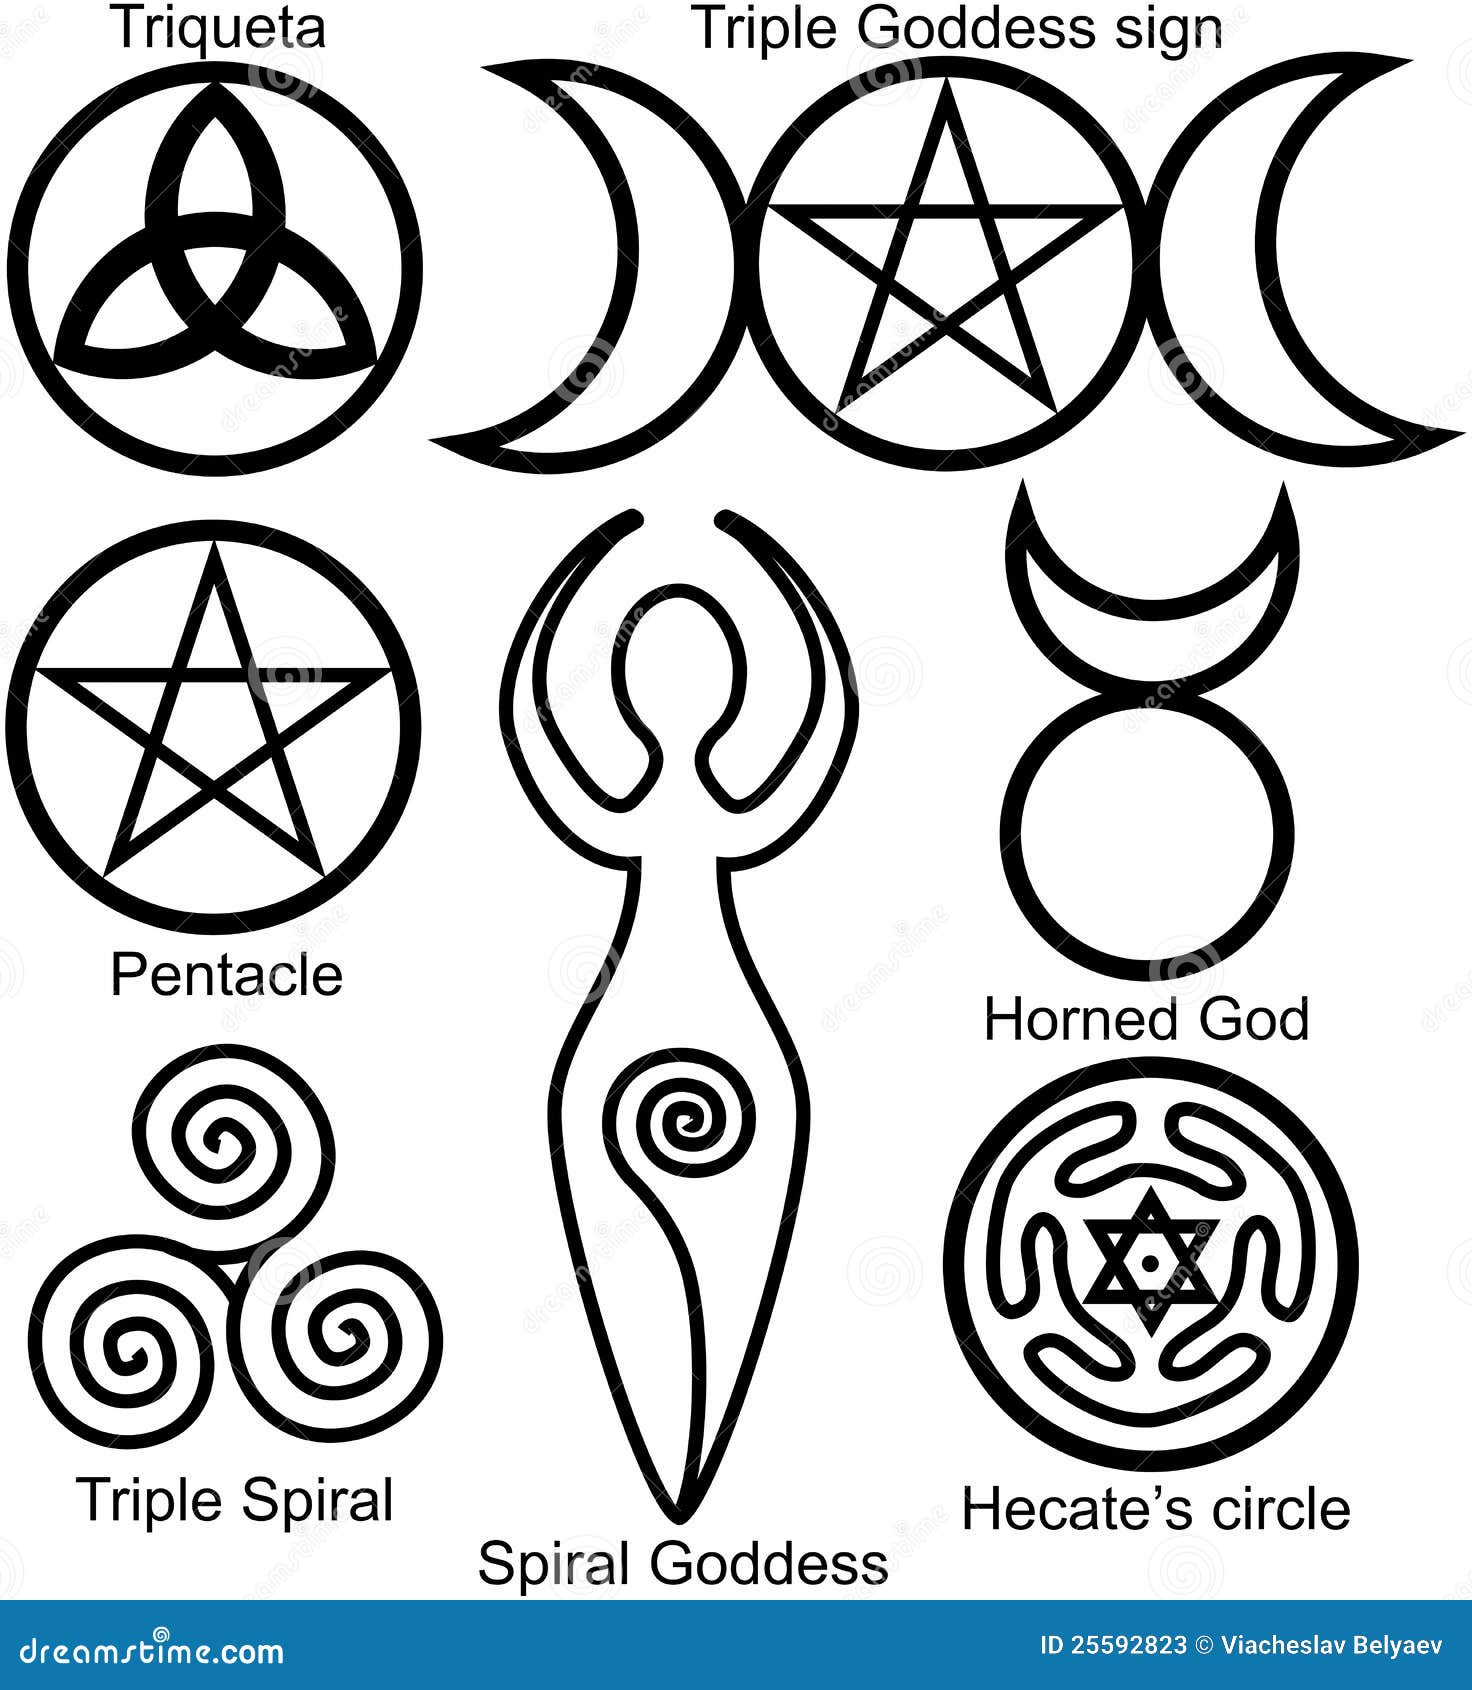 wiccan symbol of fire